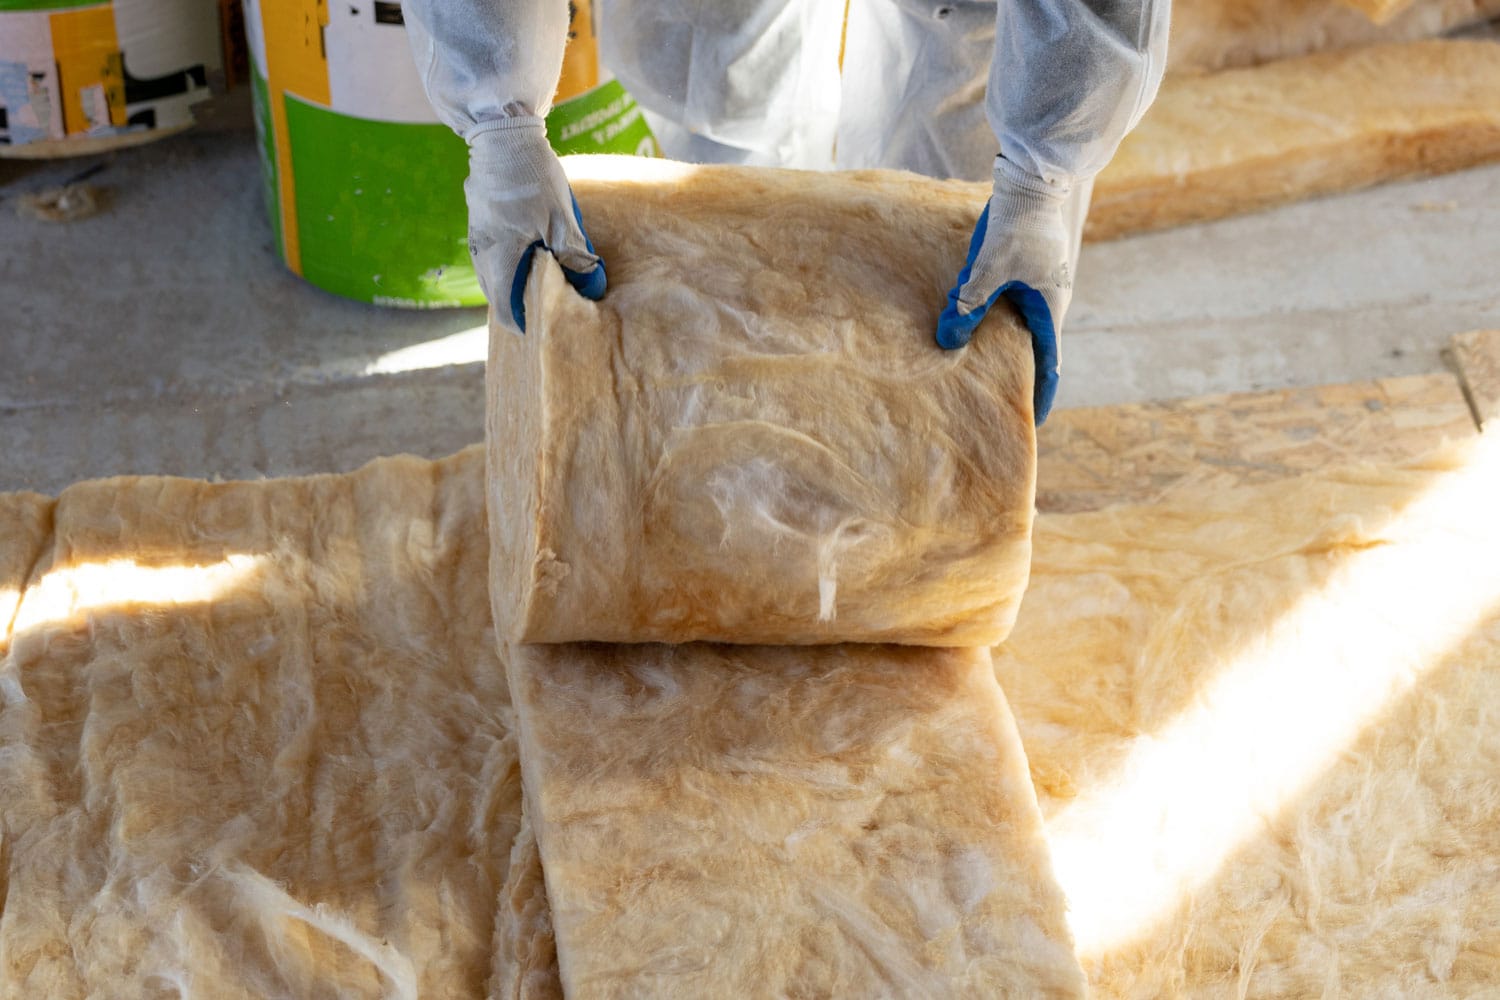 A worker unrolling rockwool insulation for the atticA